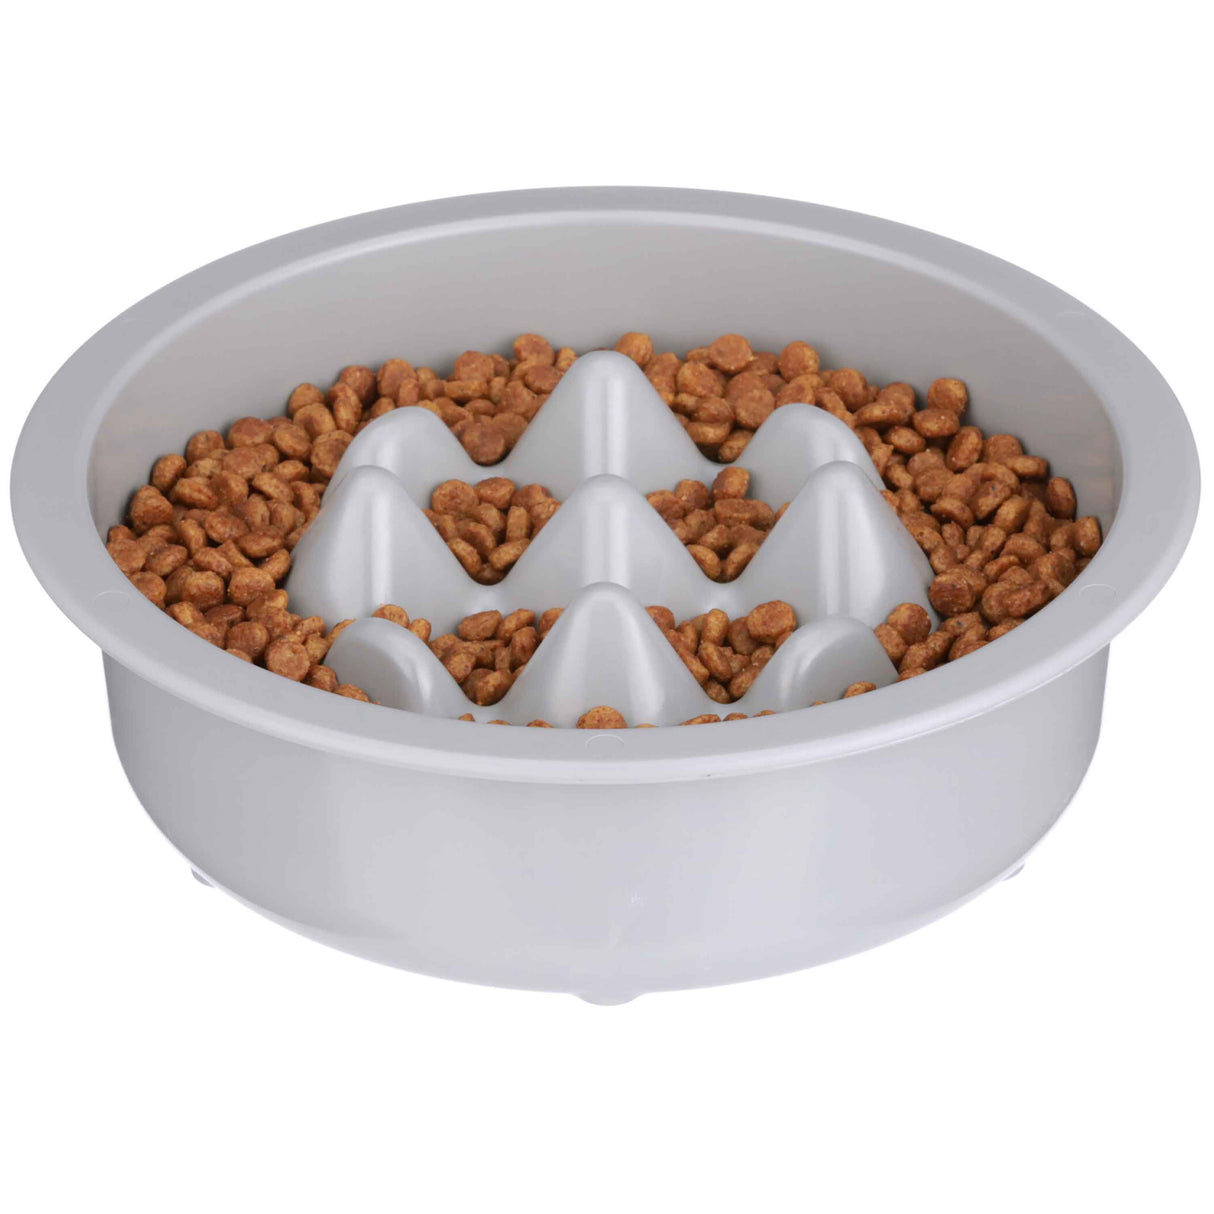 Niner slow feed bowl filled with dry pet food